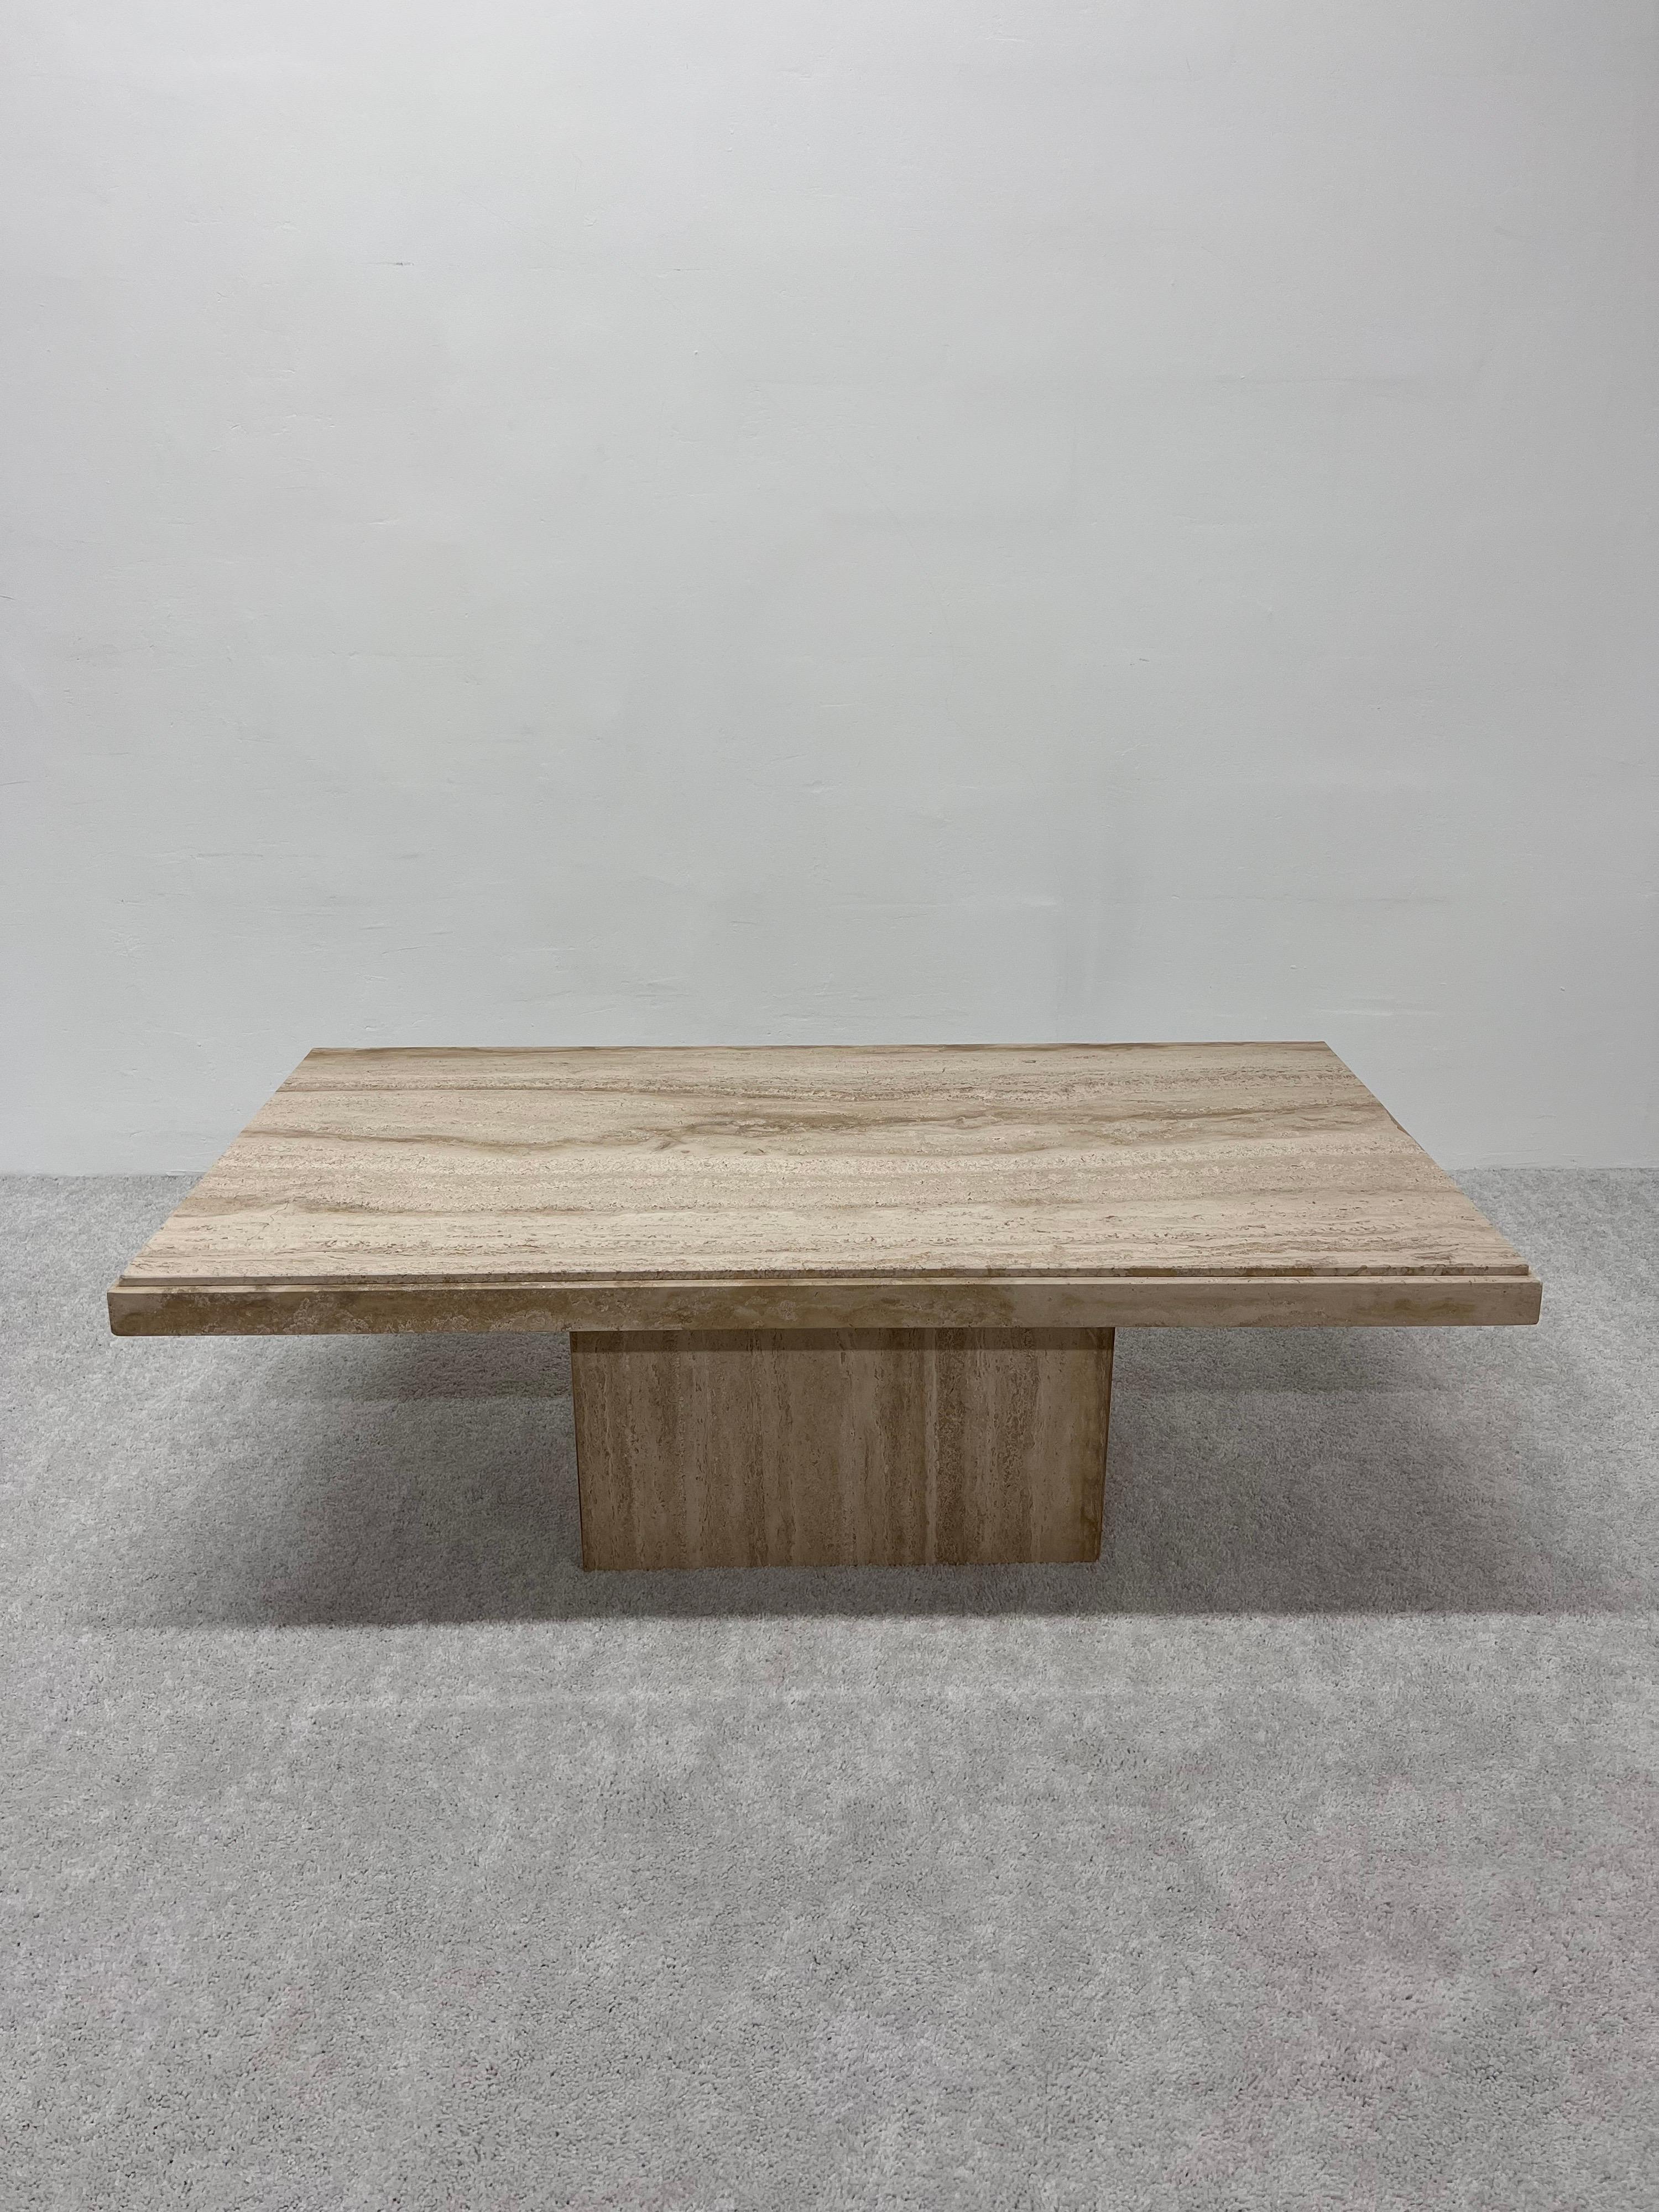 Mid-century polished Italian travertine coffee or cocktail table from the 1970s.